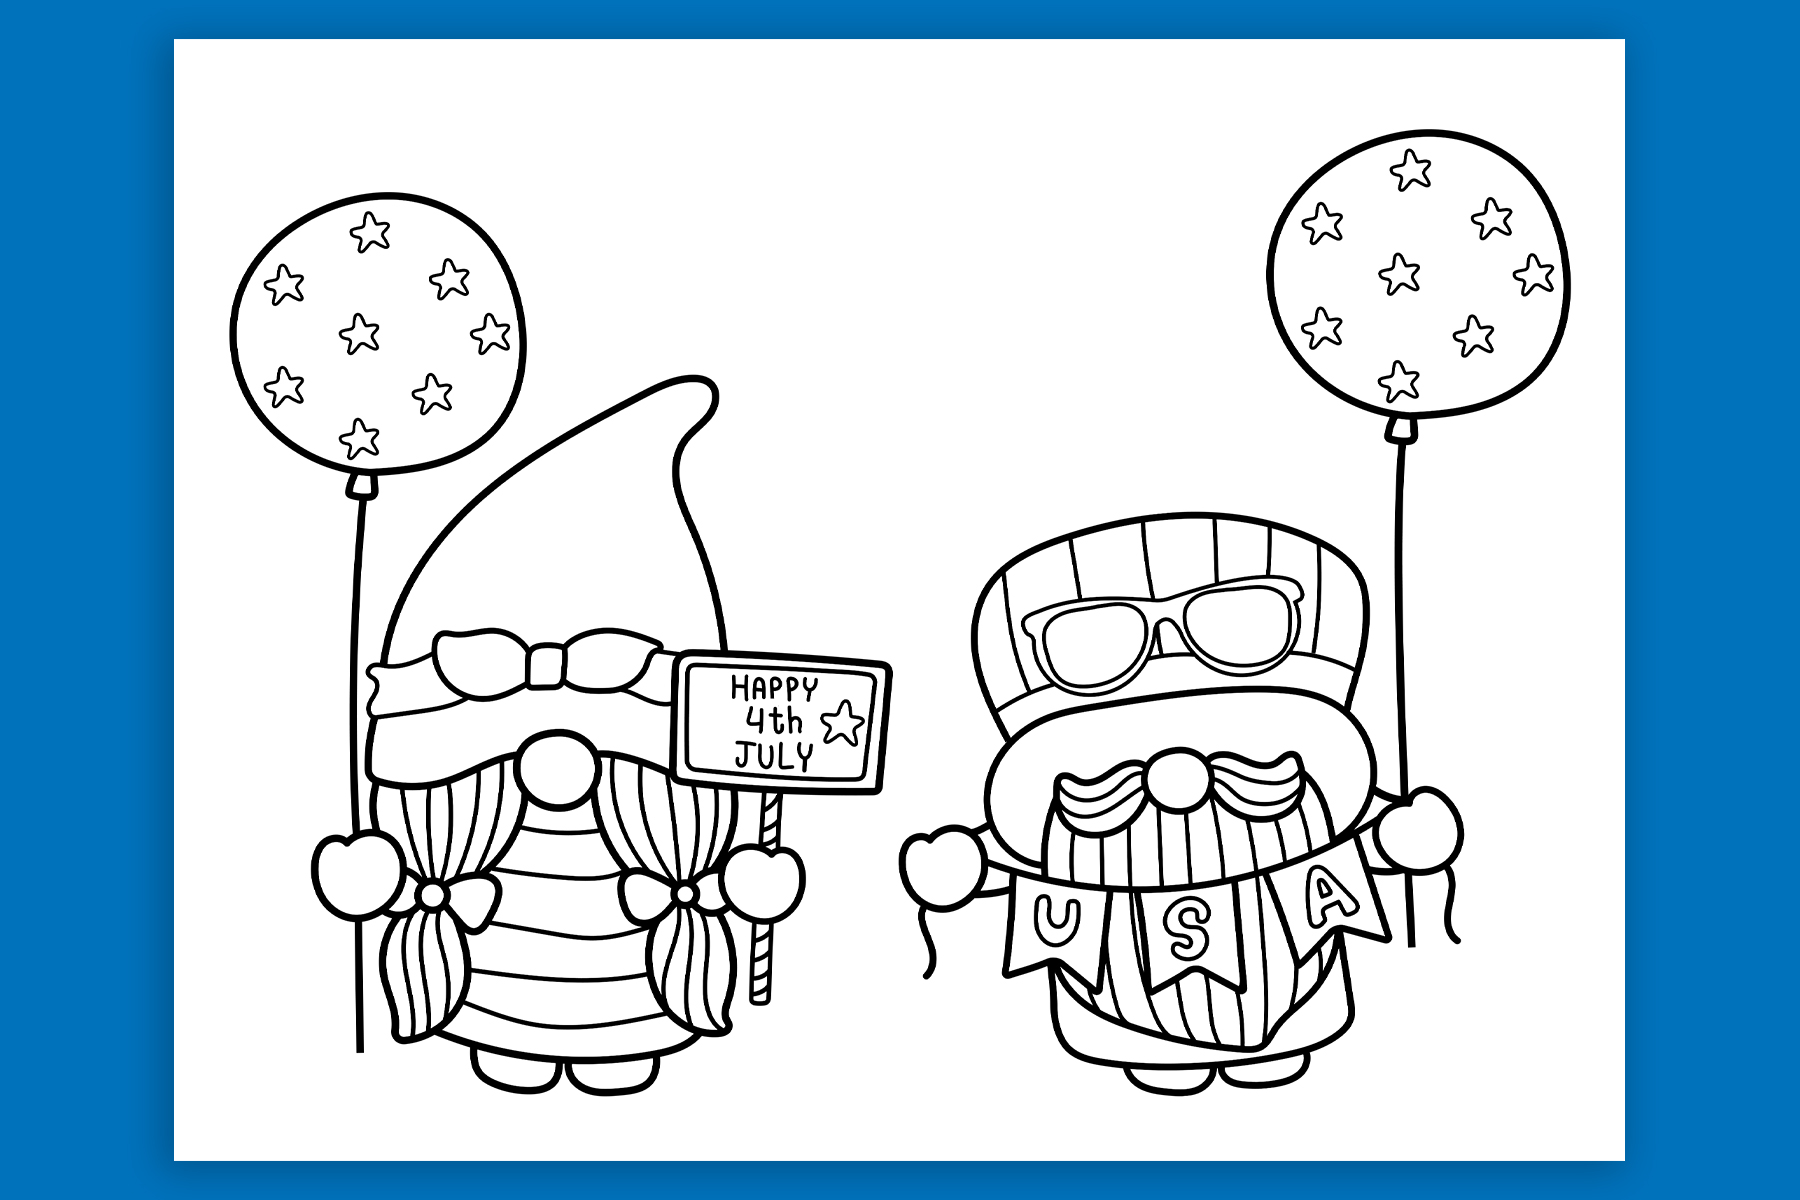 This free 4th of July coloring page features two patriotic gnomes holding balloons. One also has a Happy 4th of July sign and the other has a USA banner.